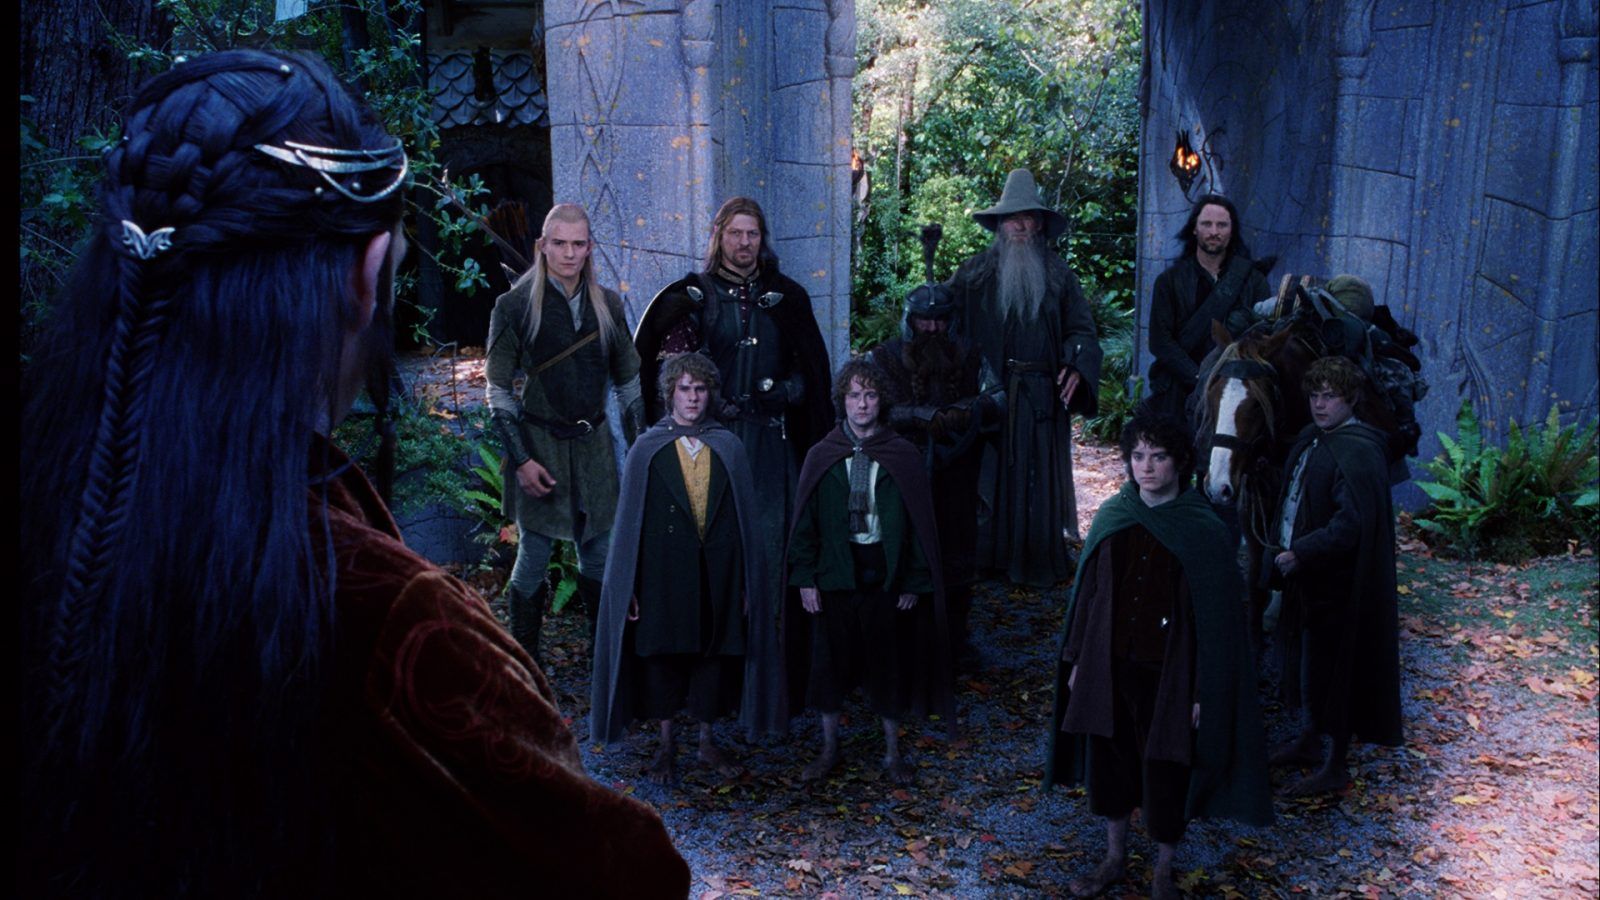 Watch The Lord of the Rings: The Fellowship of the Ring Online, Stream HD  Movies